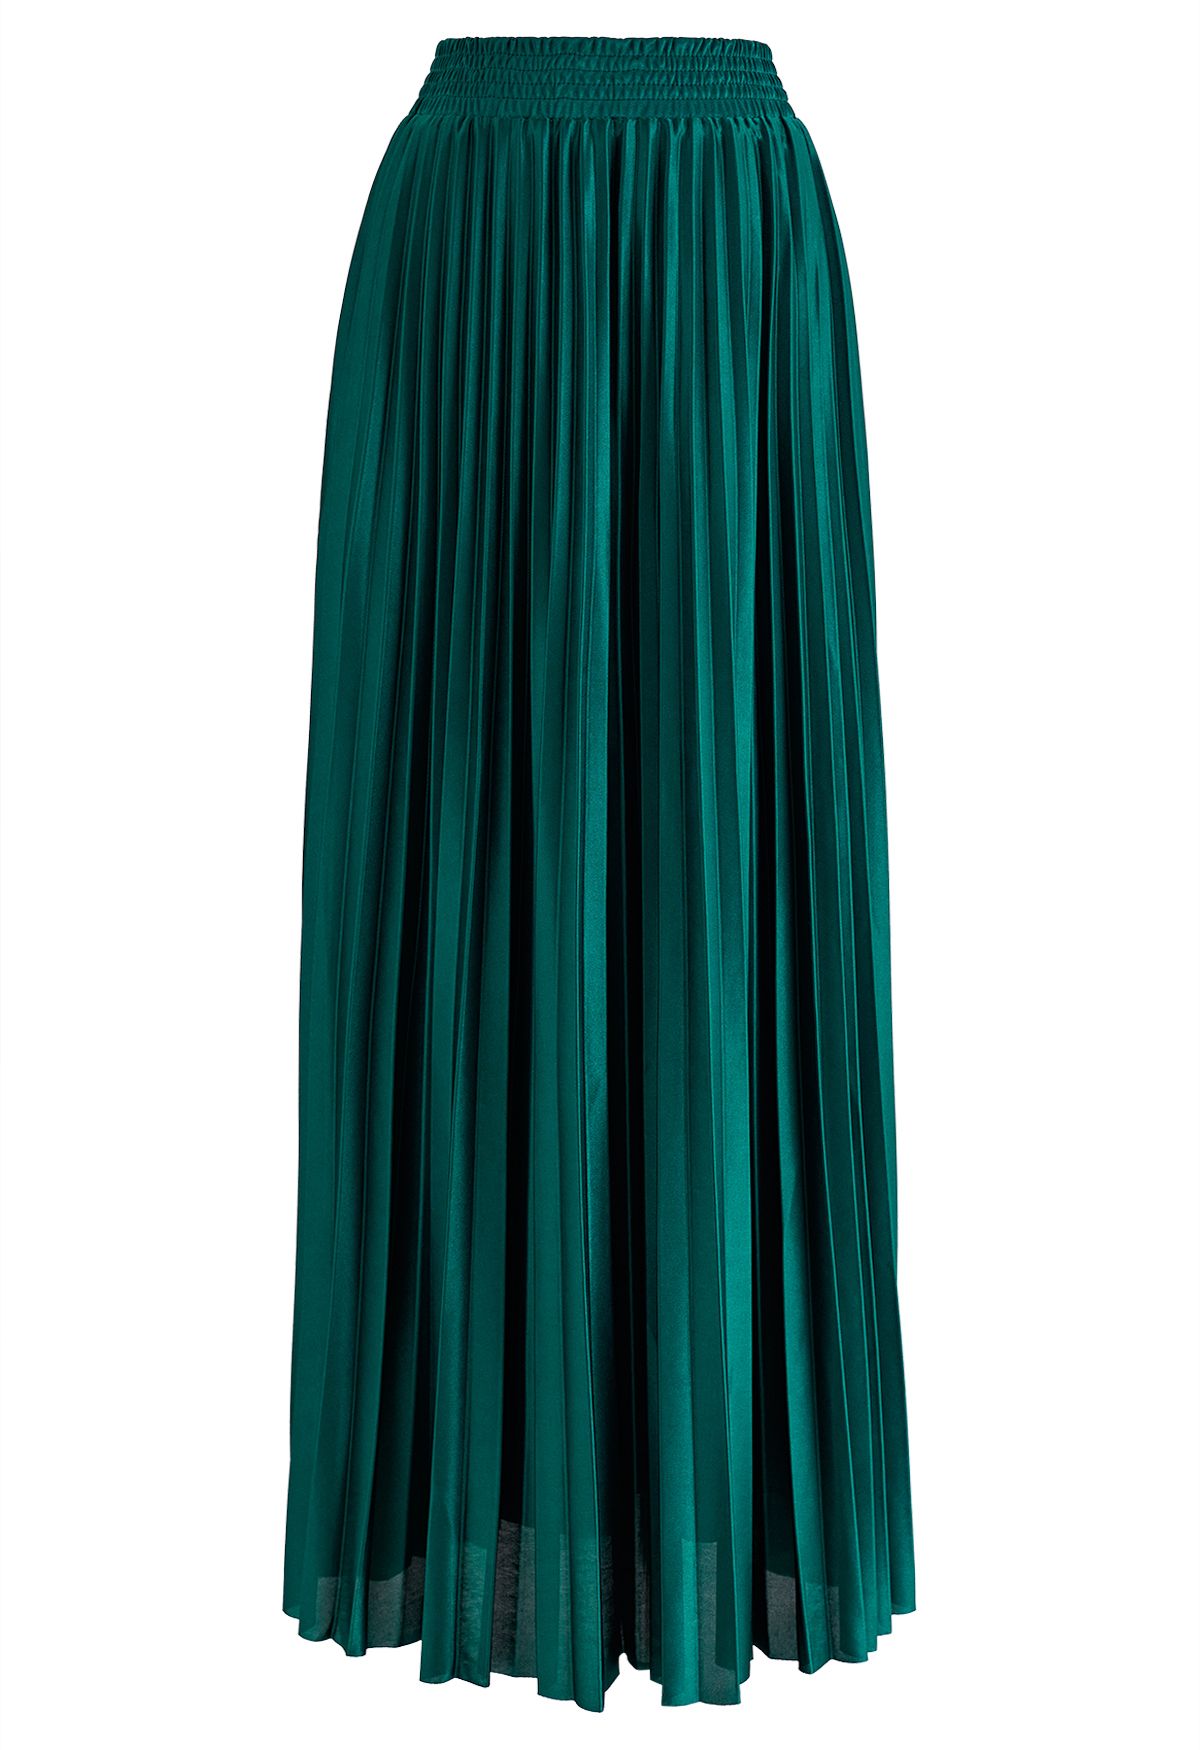 Glossy Pleated Maxi Skirt in Emerald - Retro, Indie and Unique Fashion